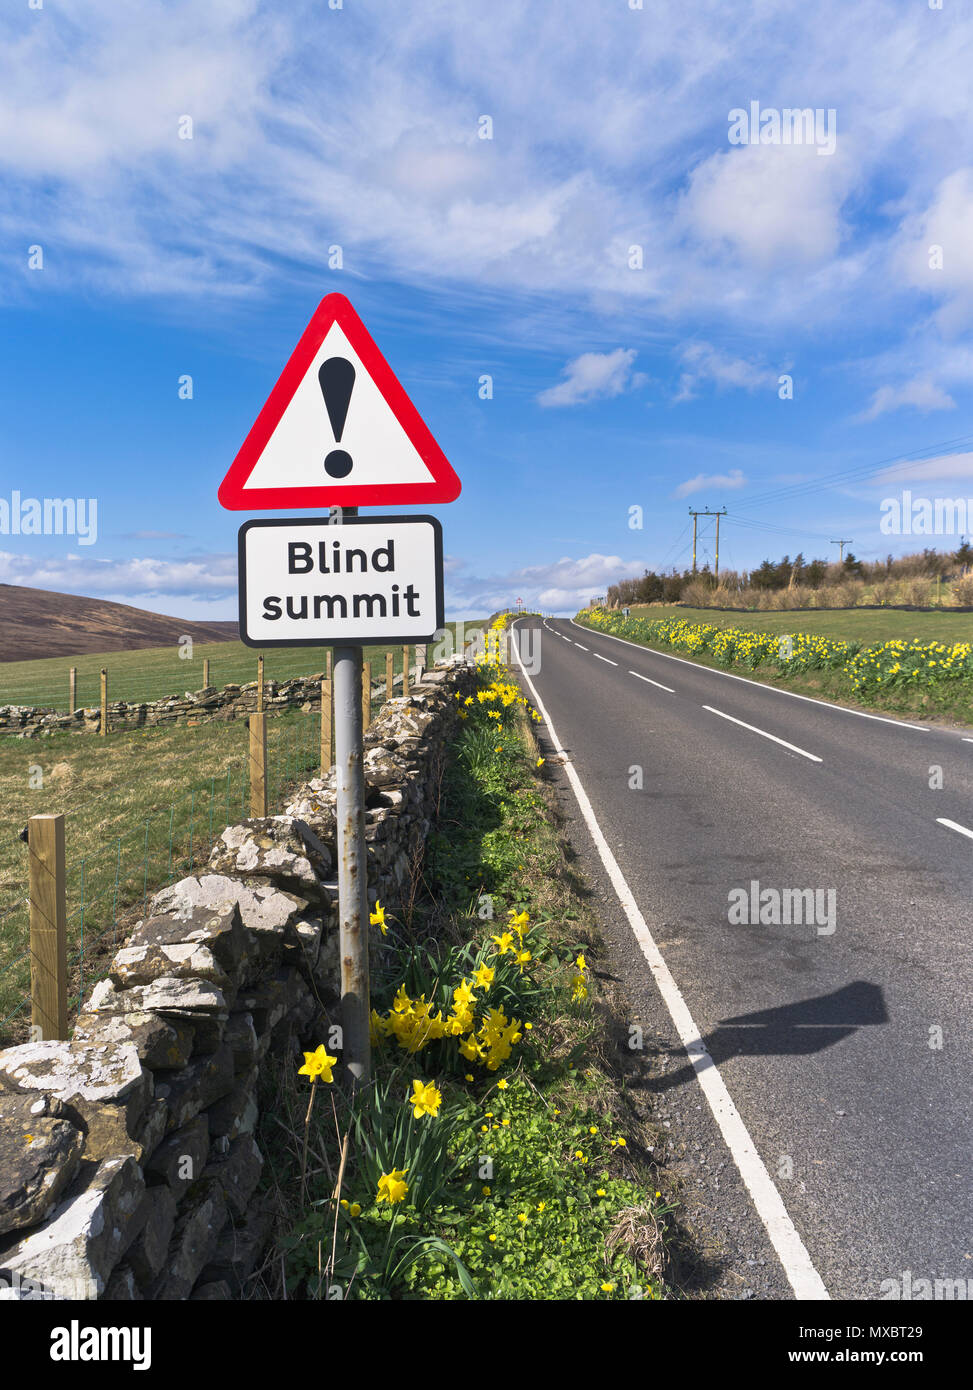 dh Blind summit ROAD ORKNEY Red Triangle warning sign empty road scotland signs Stock Photo